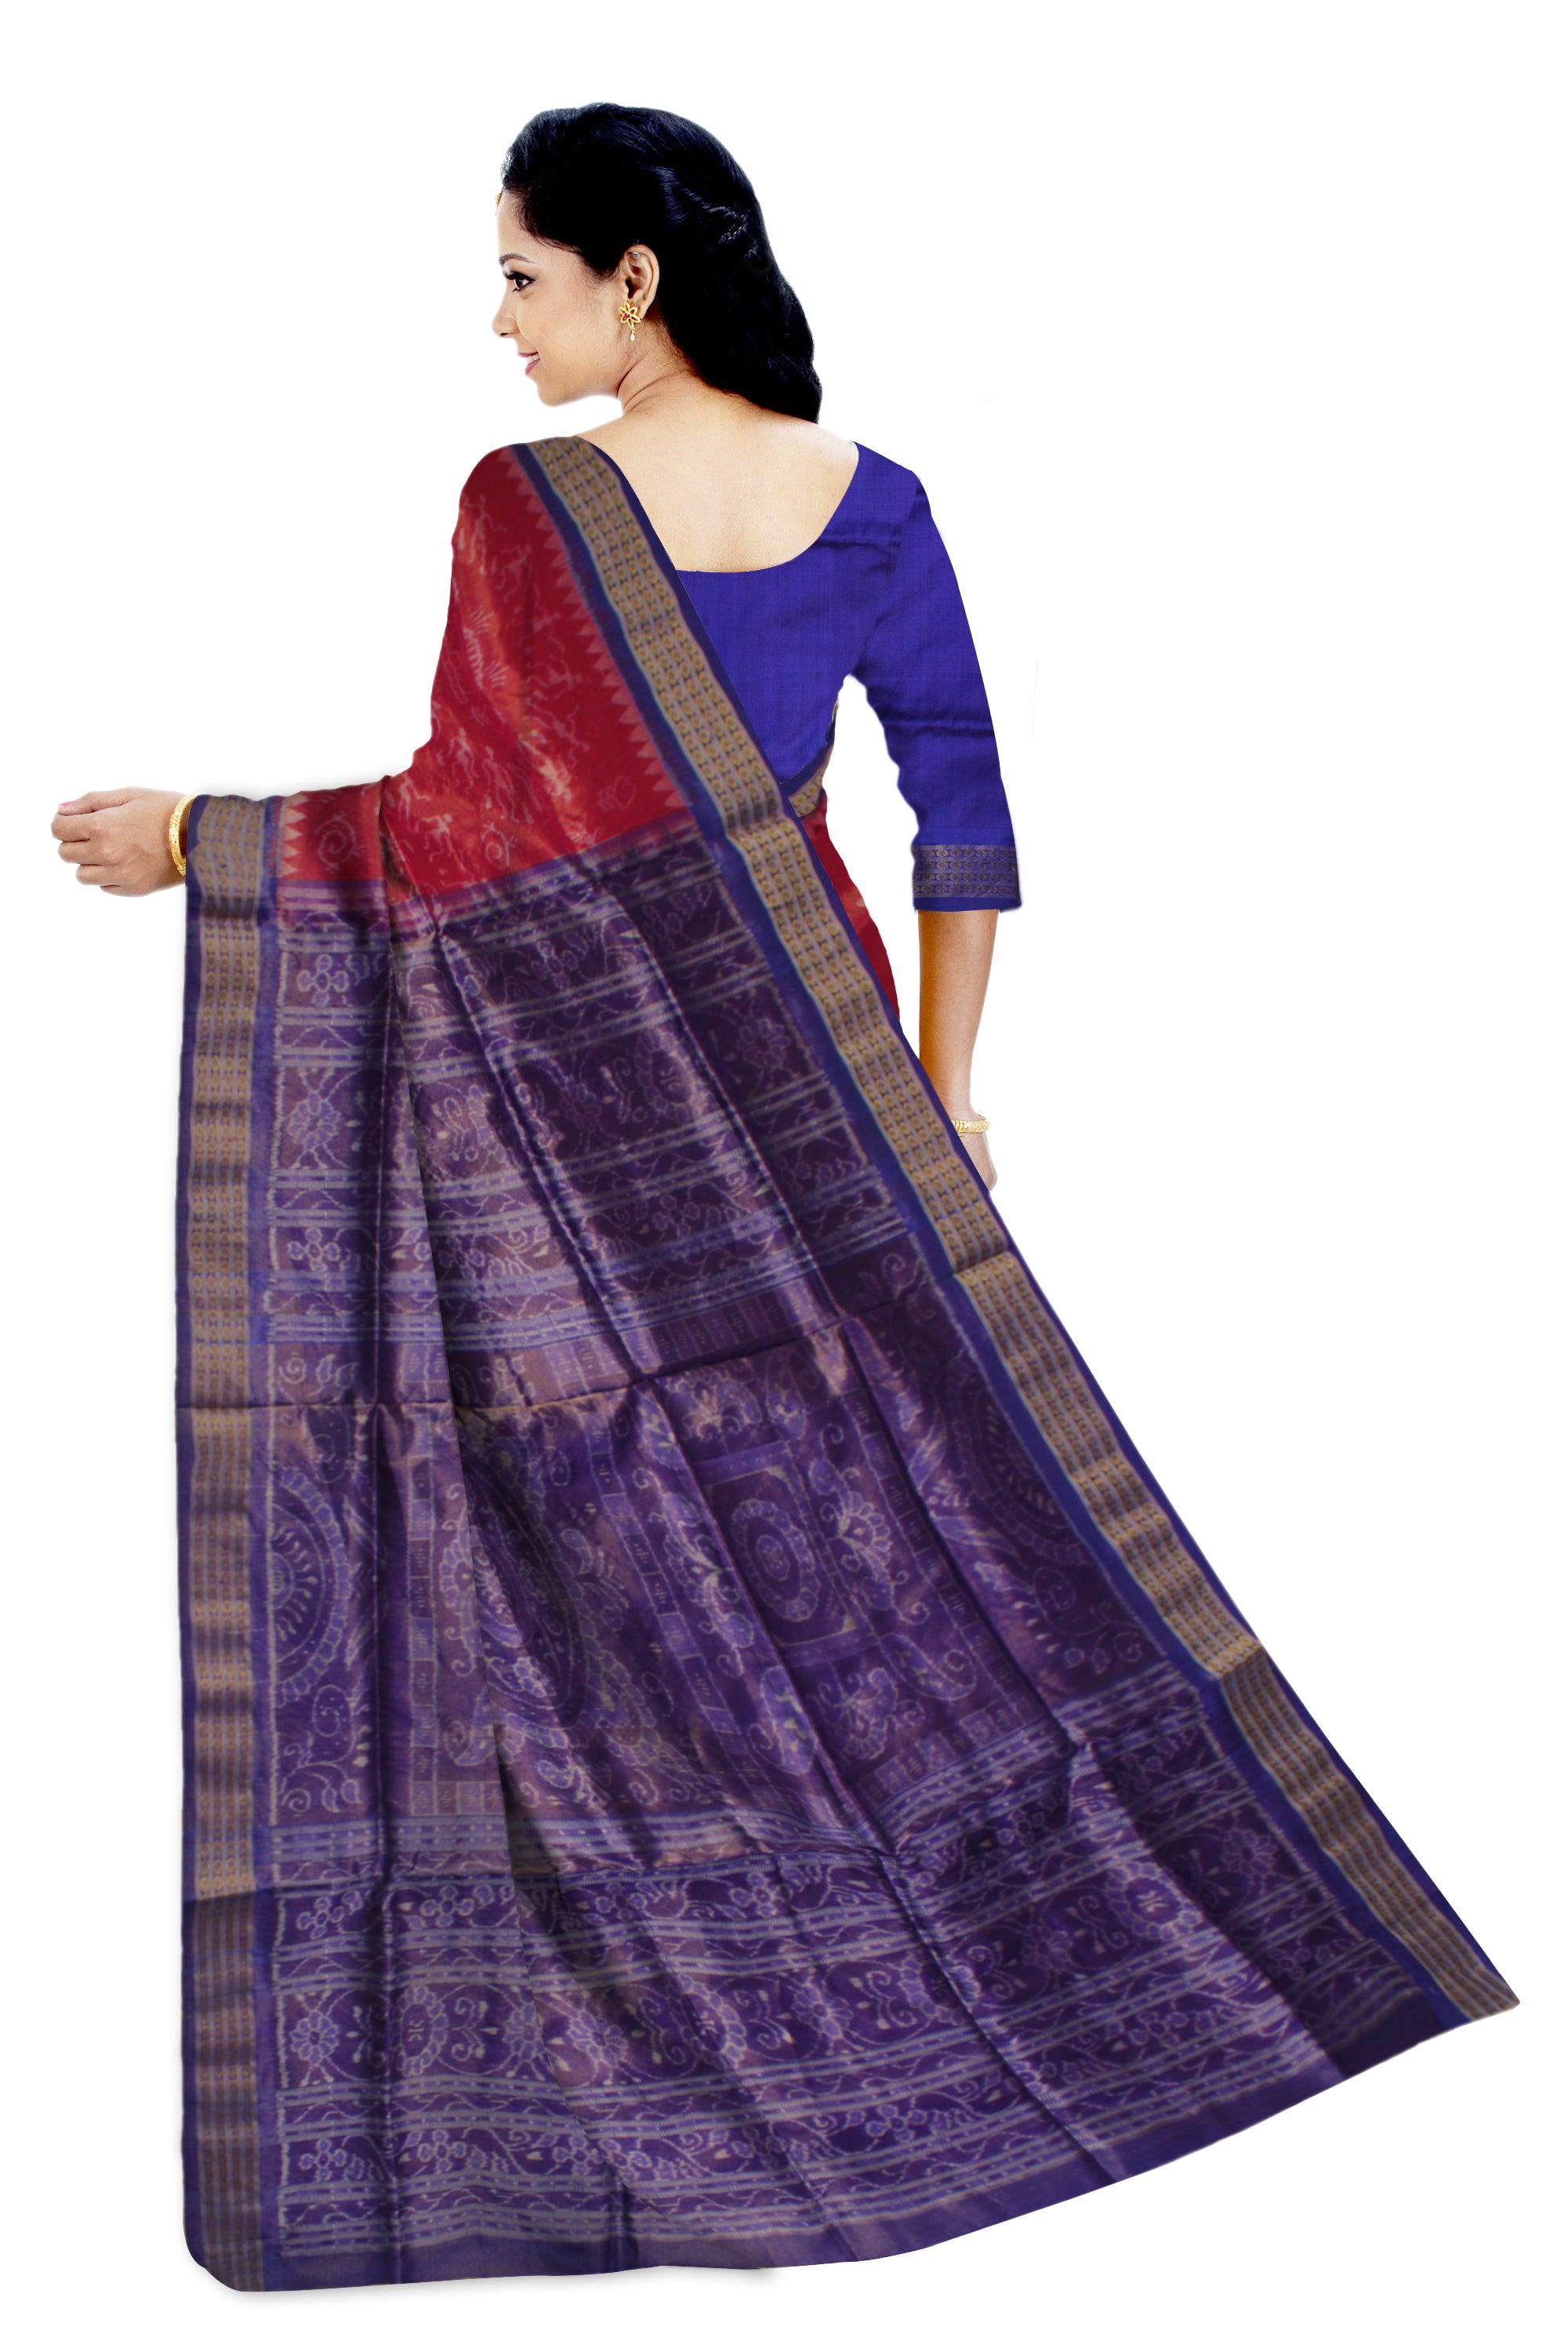 PANCHA KUTI TERRACOTTA PATTERN PURE TISSUE SILK SAREE IS CARMINE AND BLUE COLOR BASE, AVAILABLE WITH MATCHING BLOUSE PIECE. - Koshali Arts & Crafts Enterprise